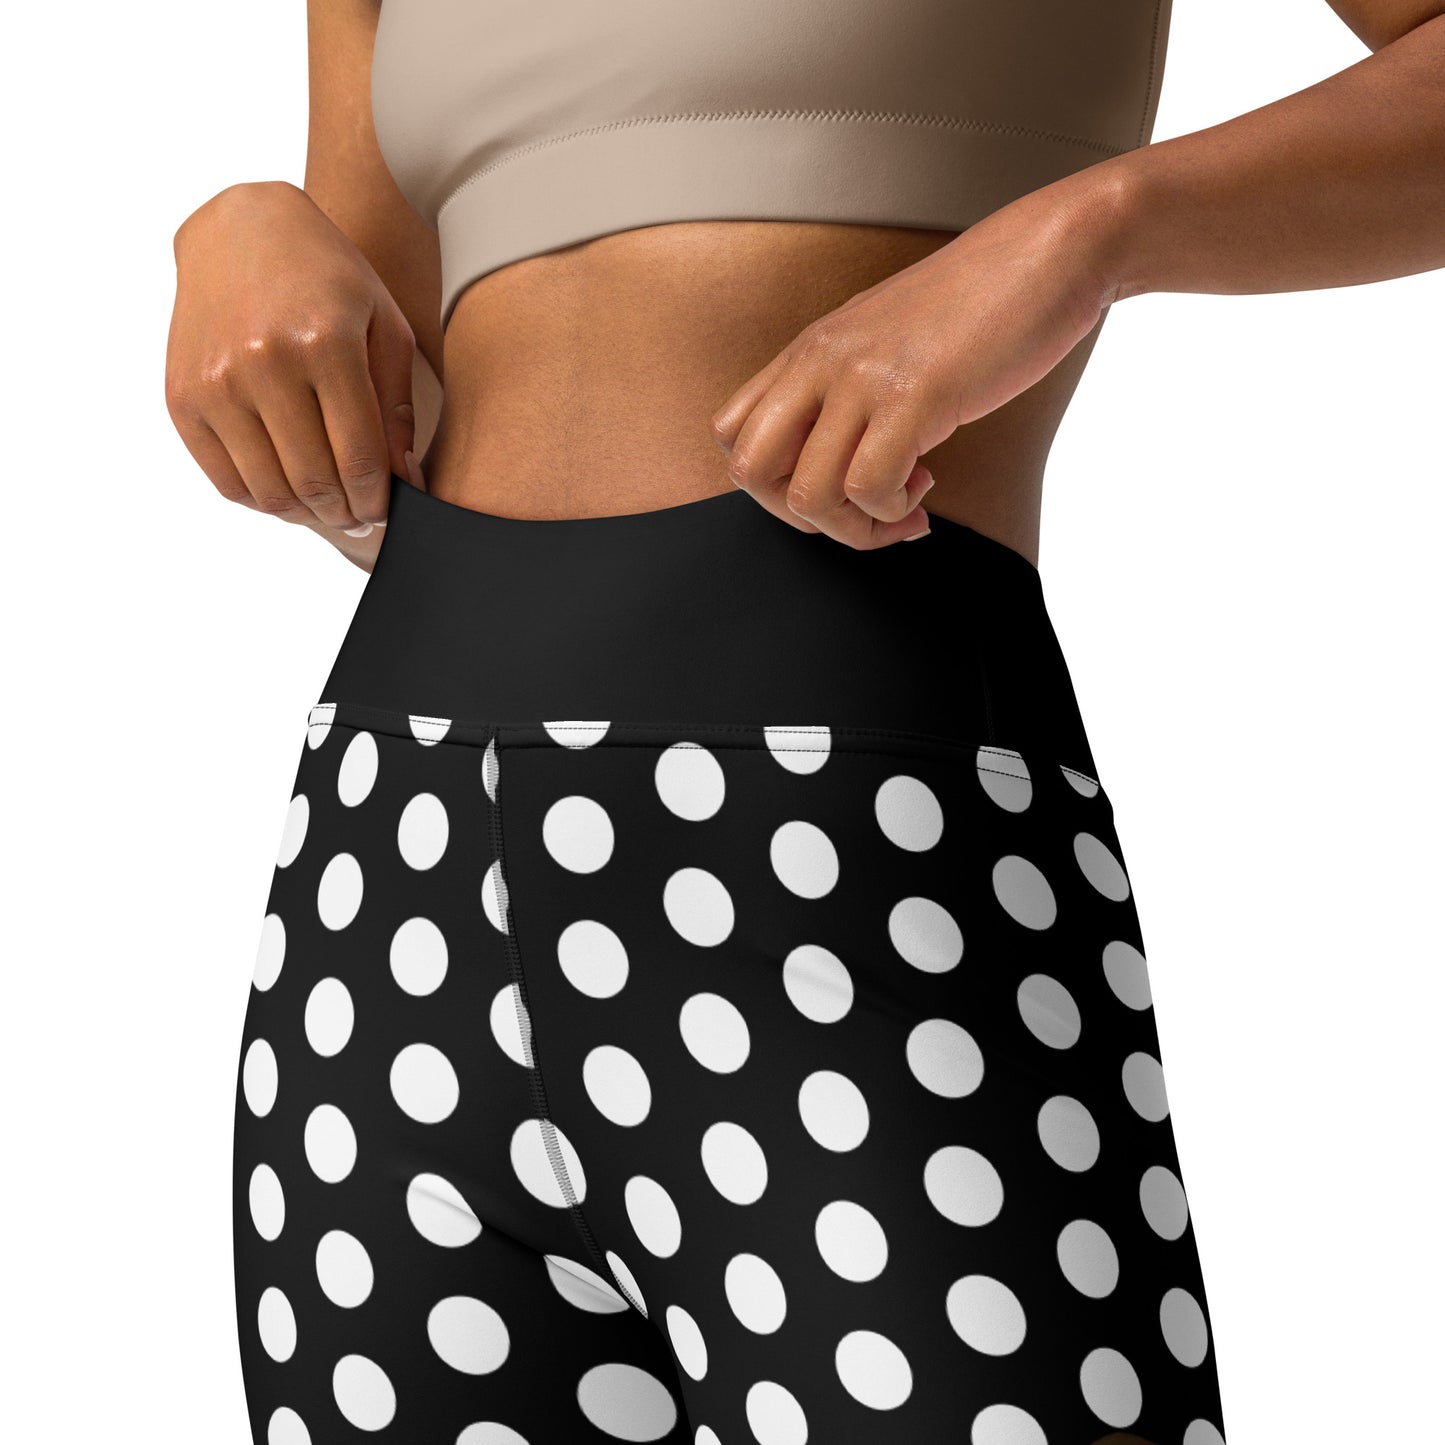 a woman in black and white polka dot shorts